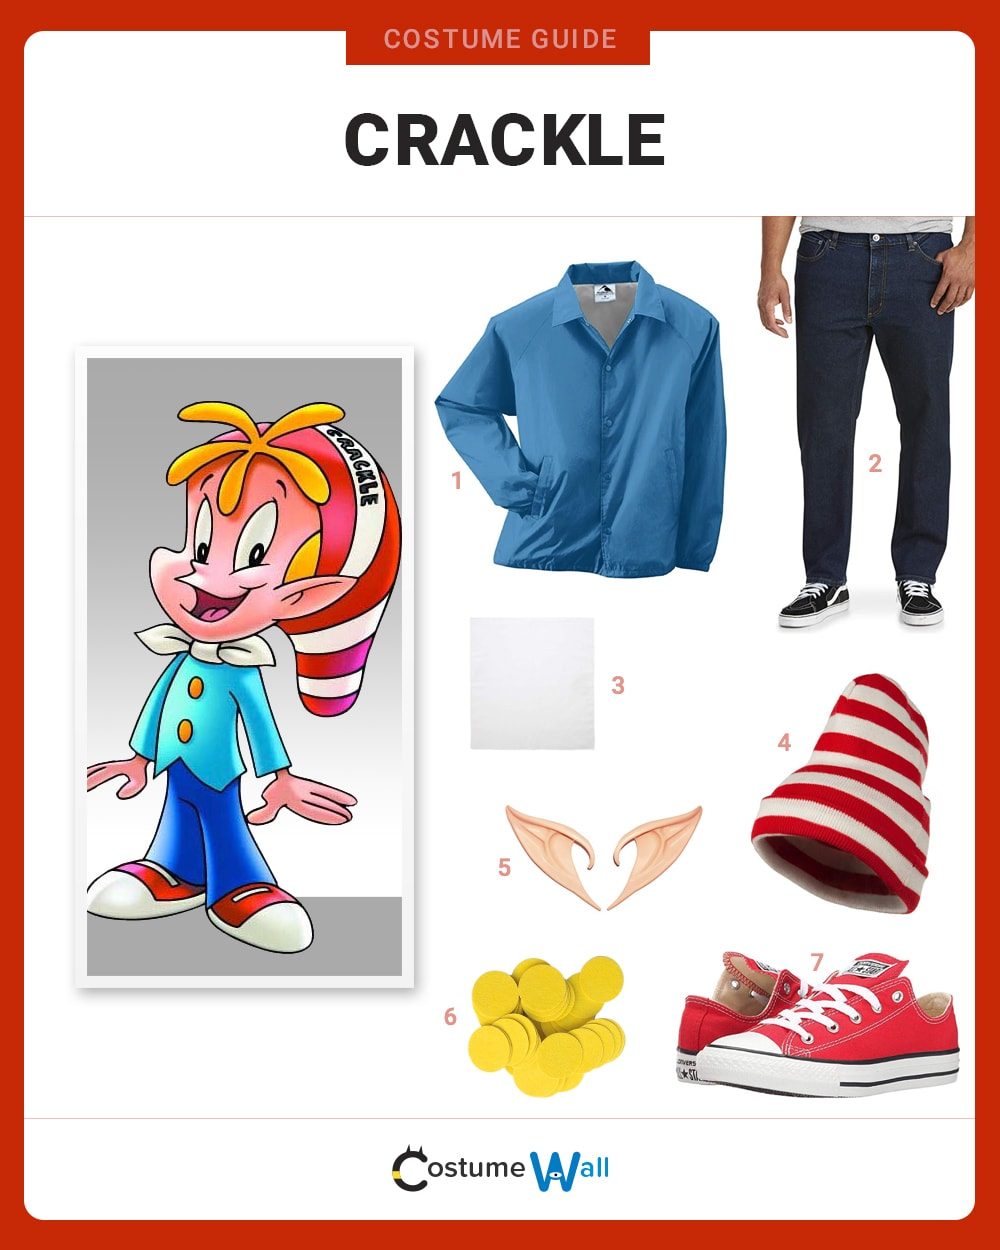 Crackle Costume Guide